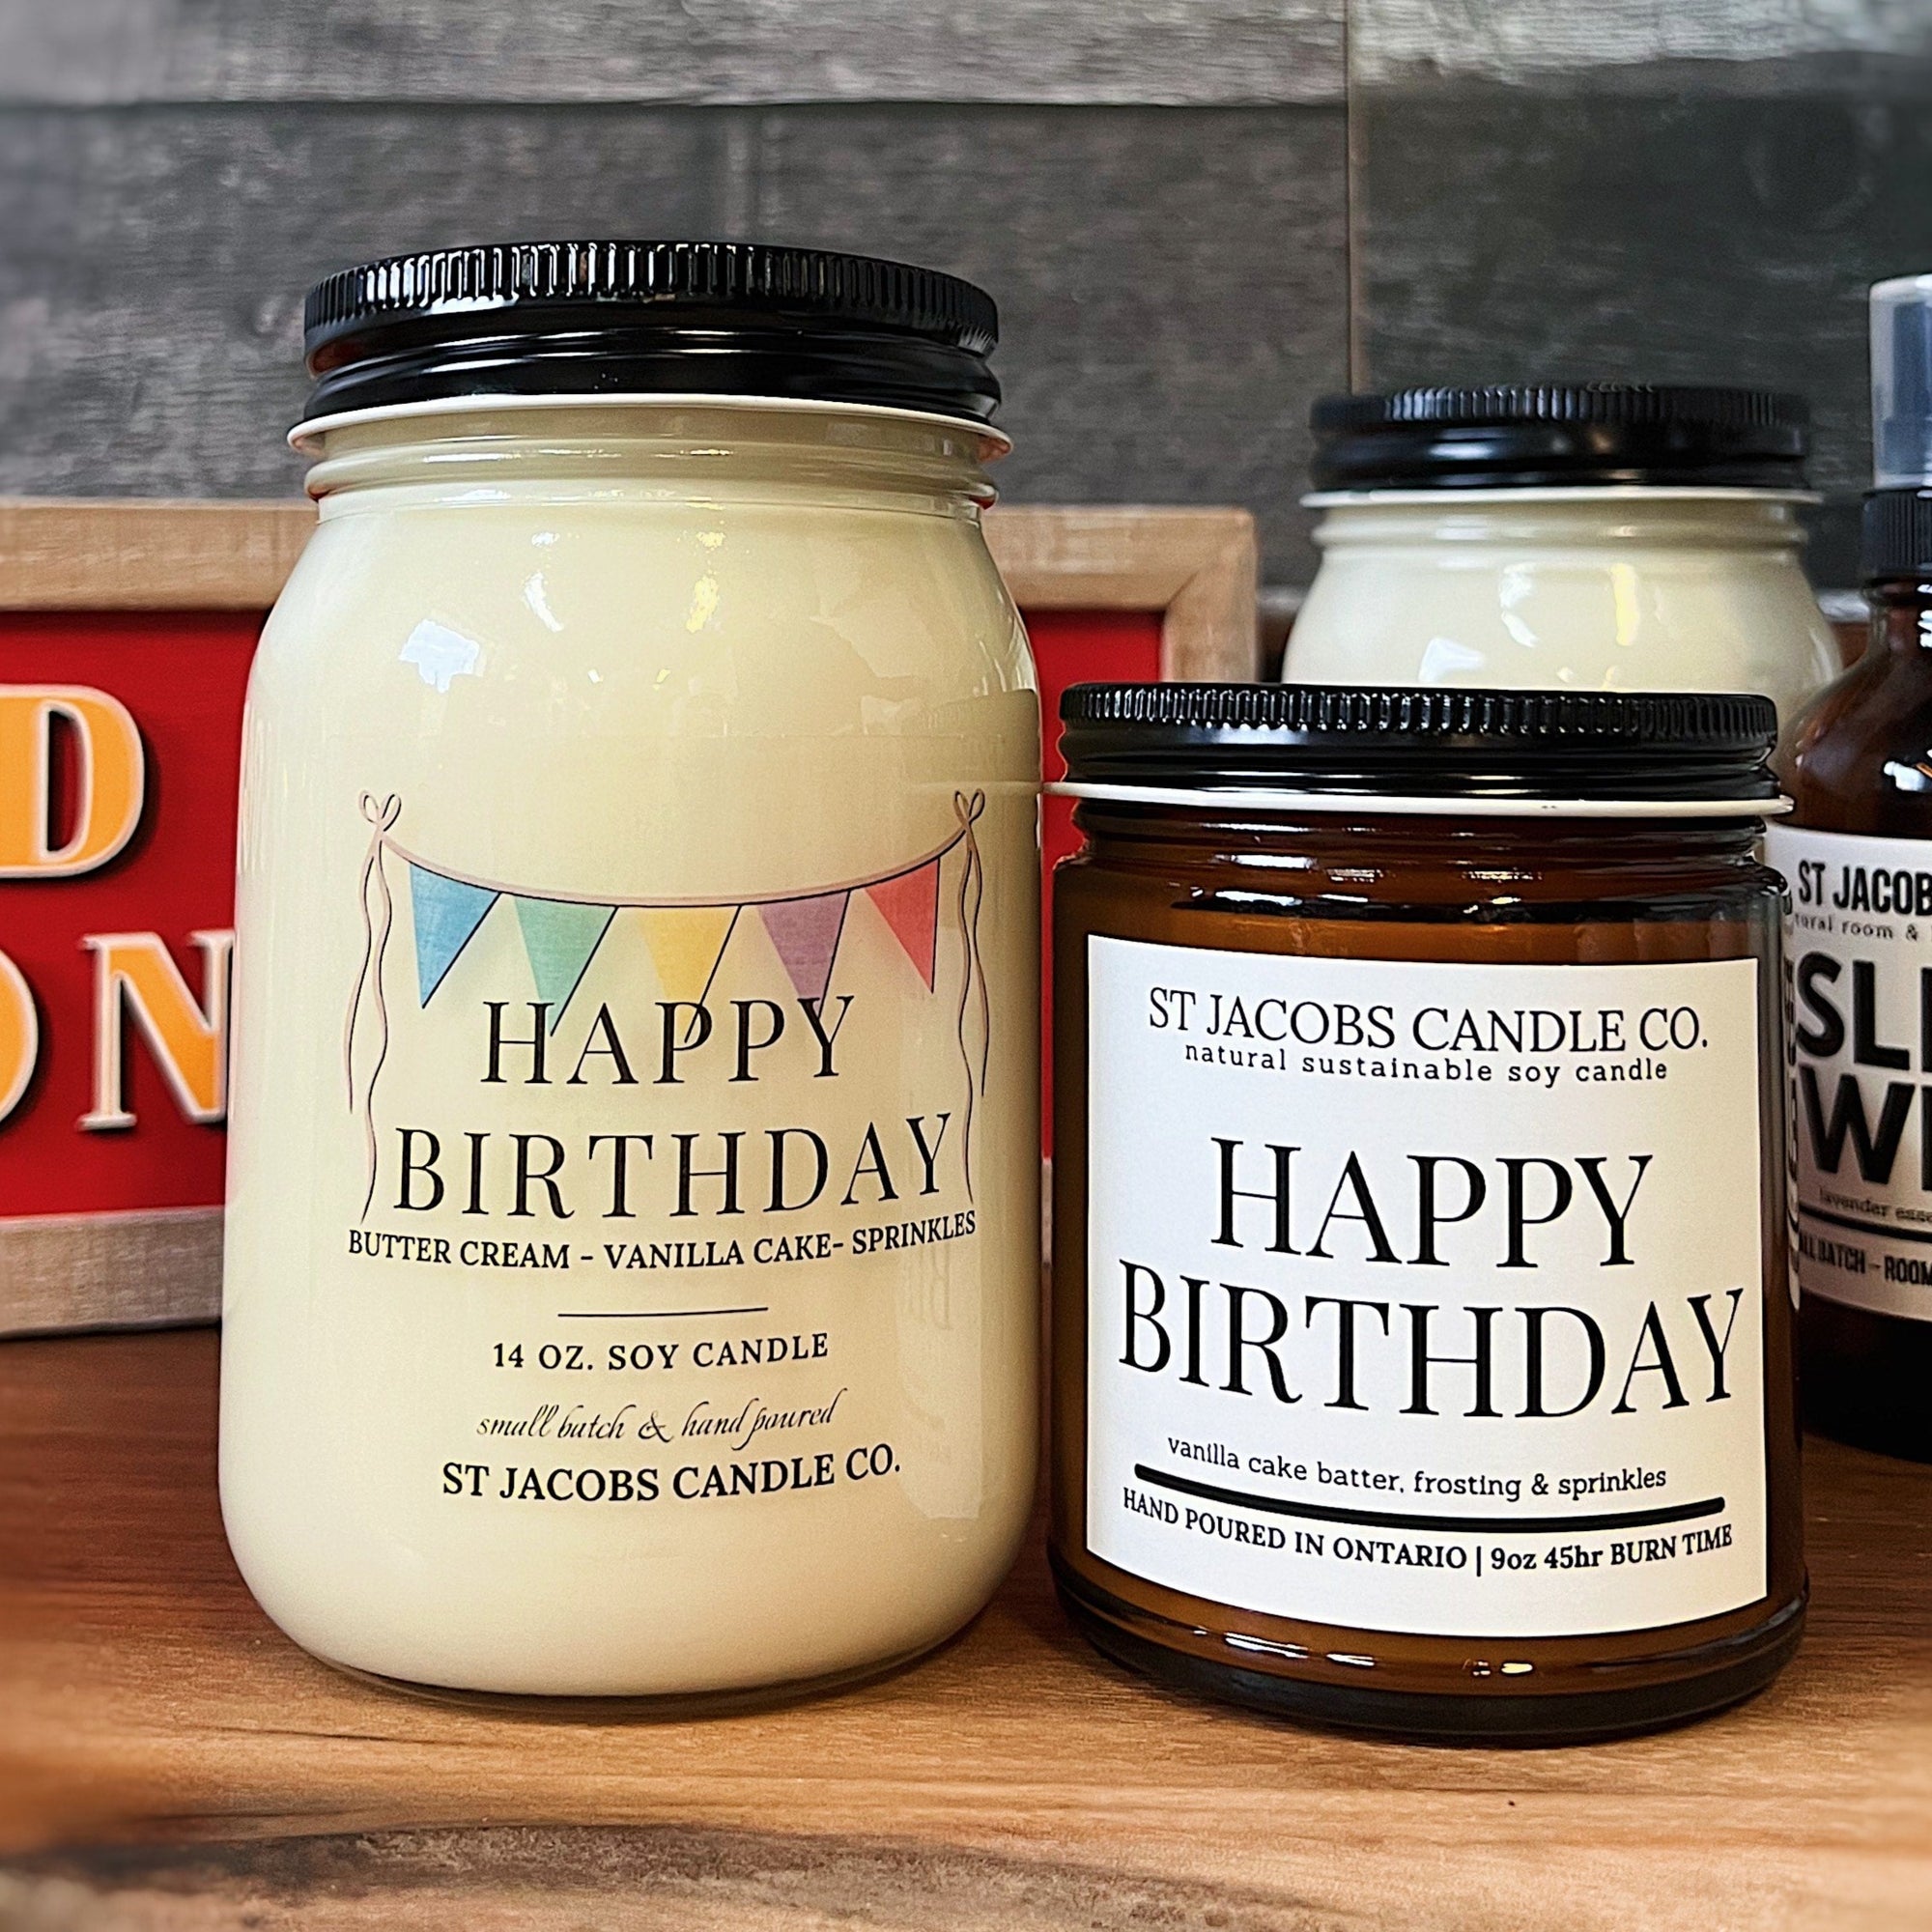 "HAPPY BIRTHDAY" Natural Soy Candle